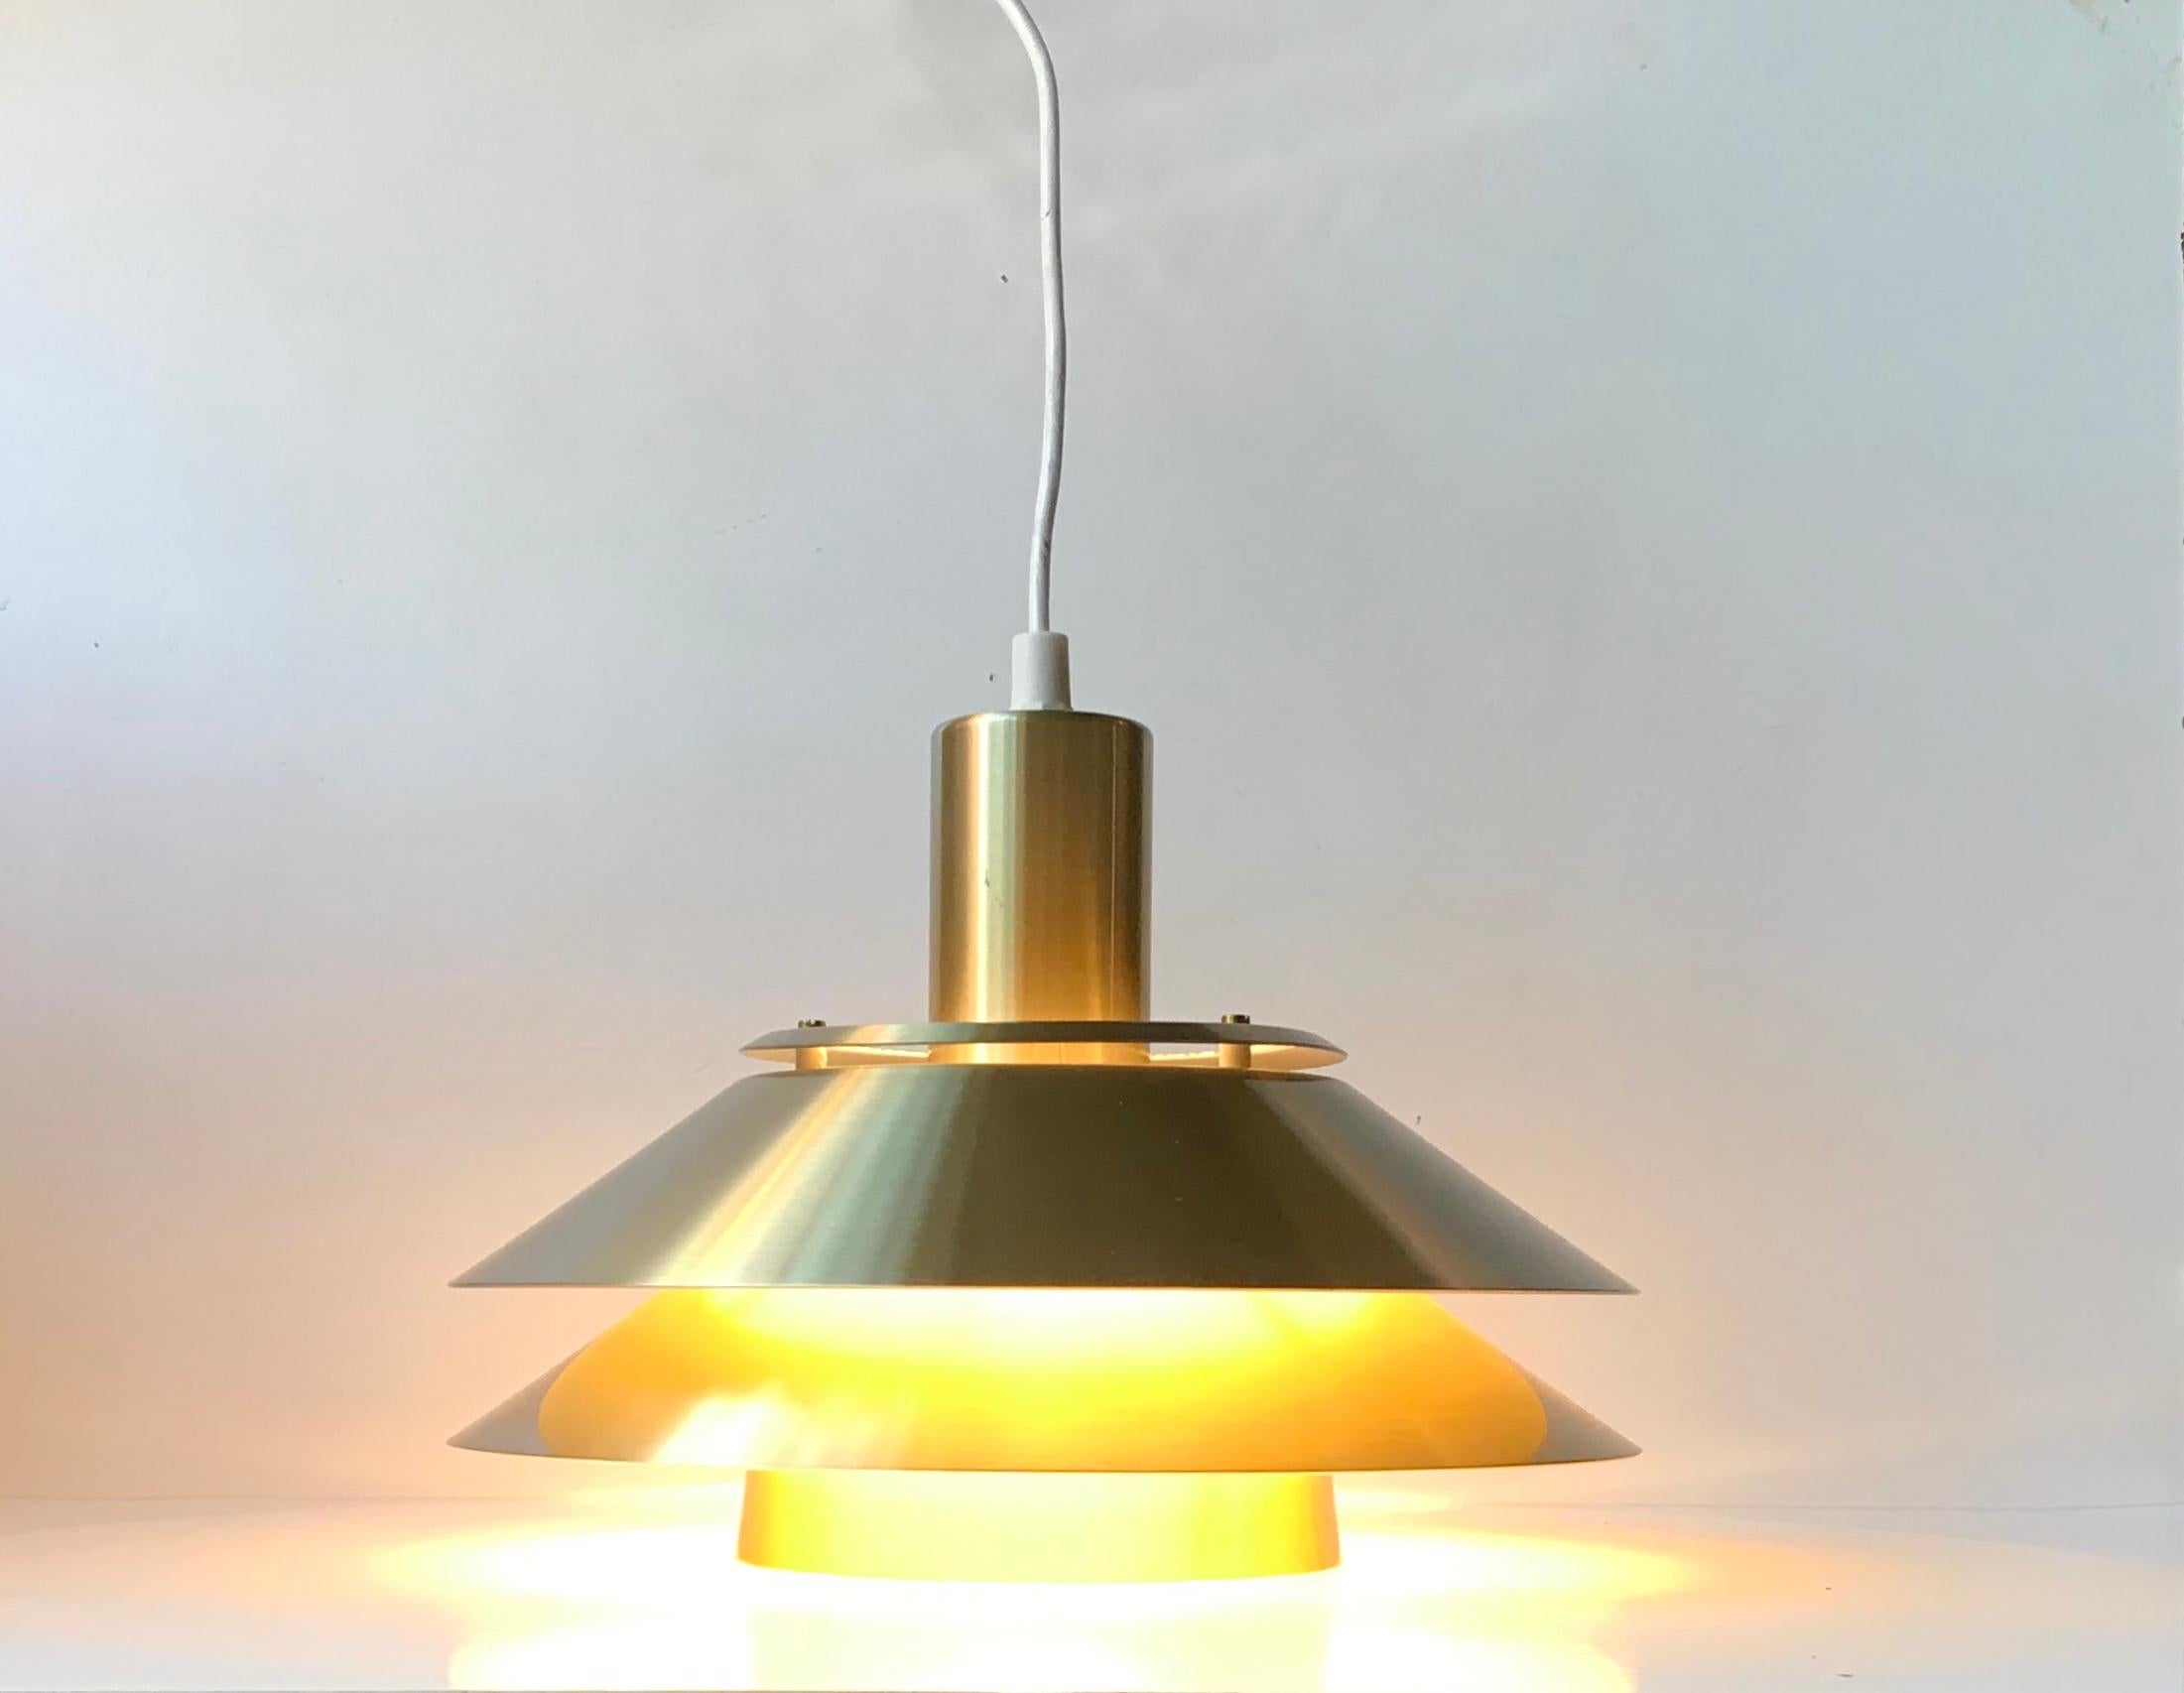 - Tiered hanging ceiling light
 - Designed and manufactured by Jeka Belysning in Denmark during the 1970s
 - Reminiscent of the PH 4 and PH 5 lamps by Poul Henningsen
 - It is constructed of brass-anodized/coated aluminium
 - Reflective white